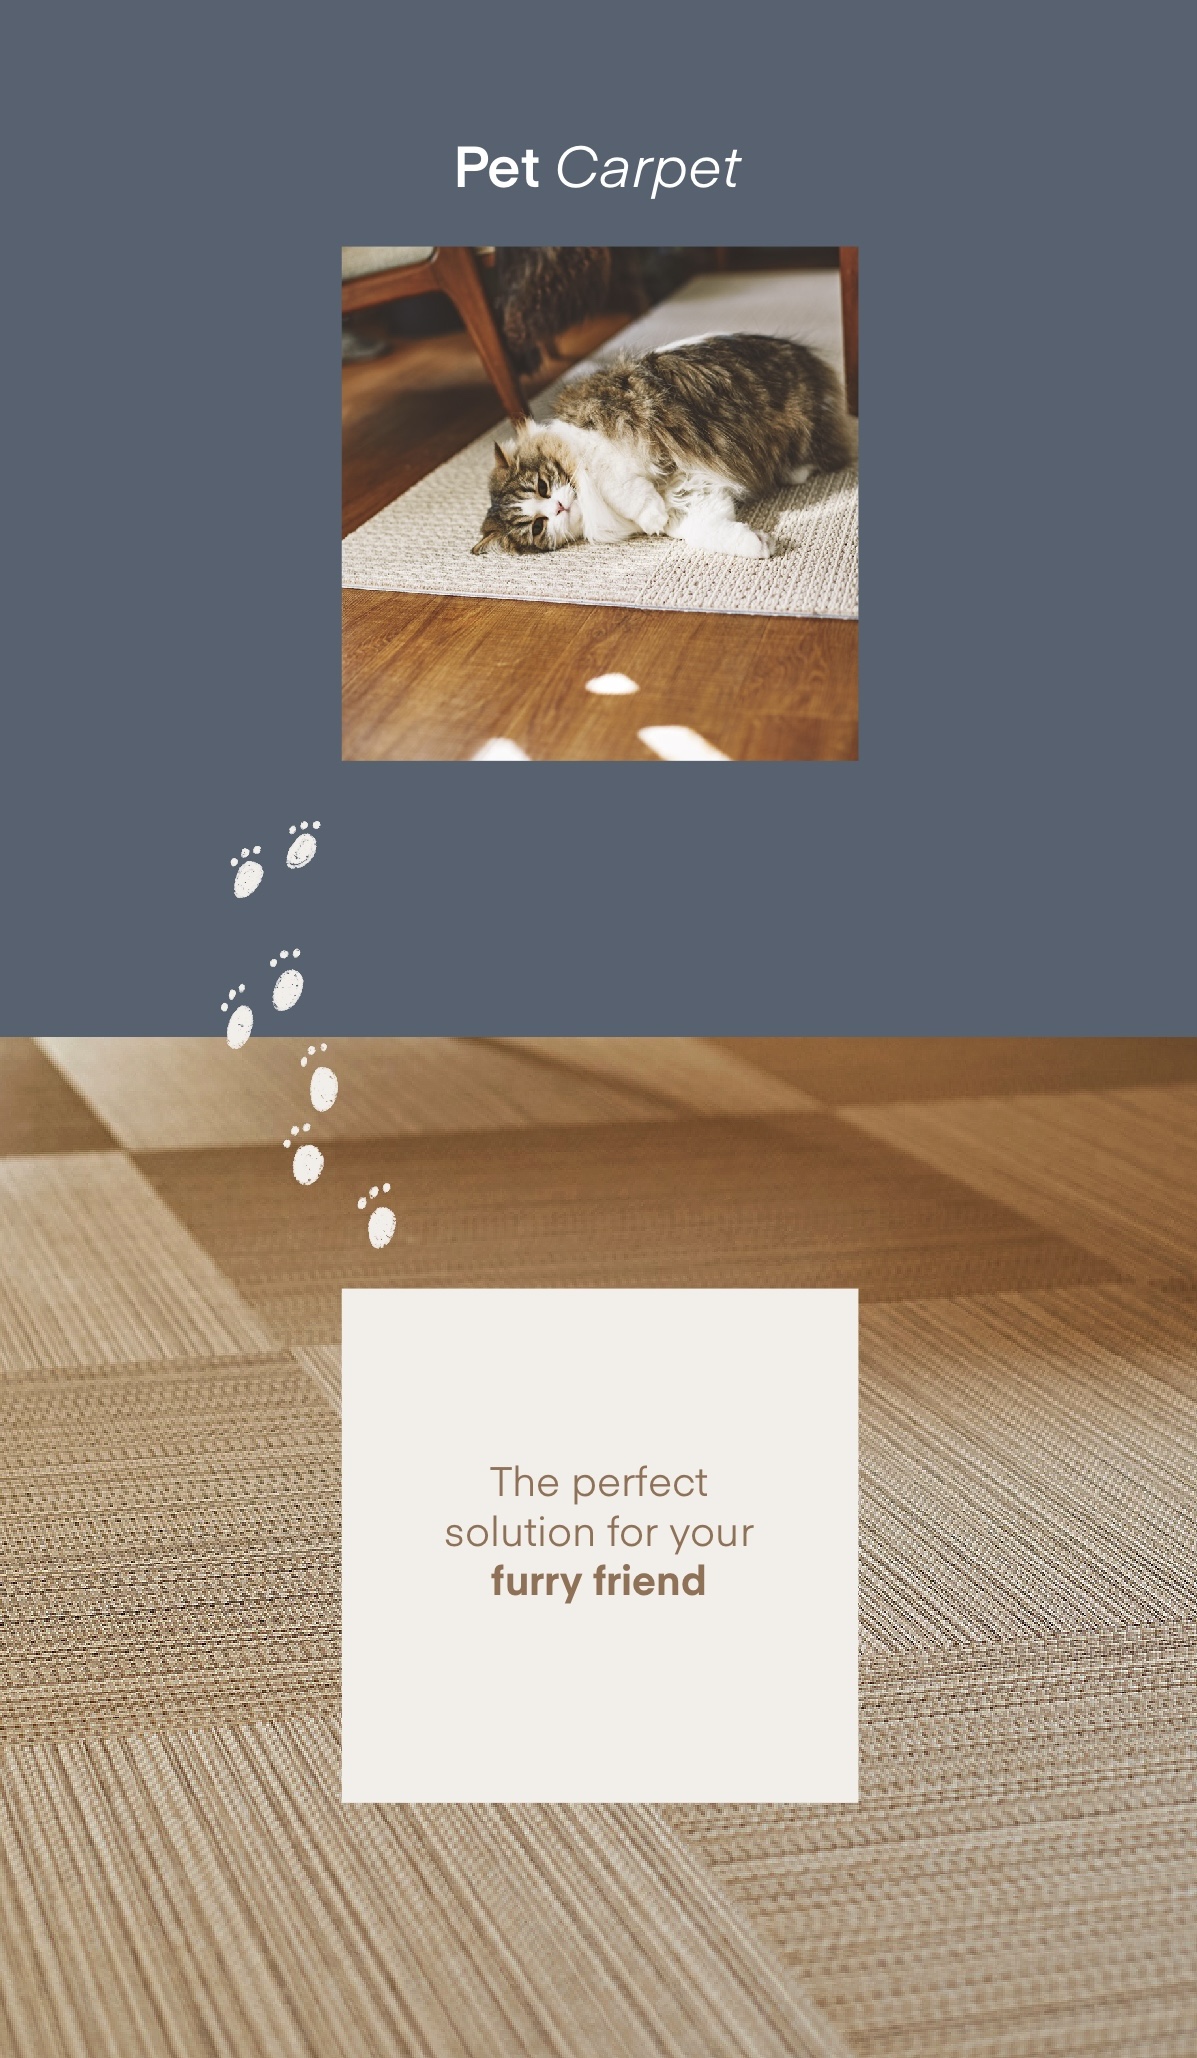 Pet carpet is the solution that caters your love for pets